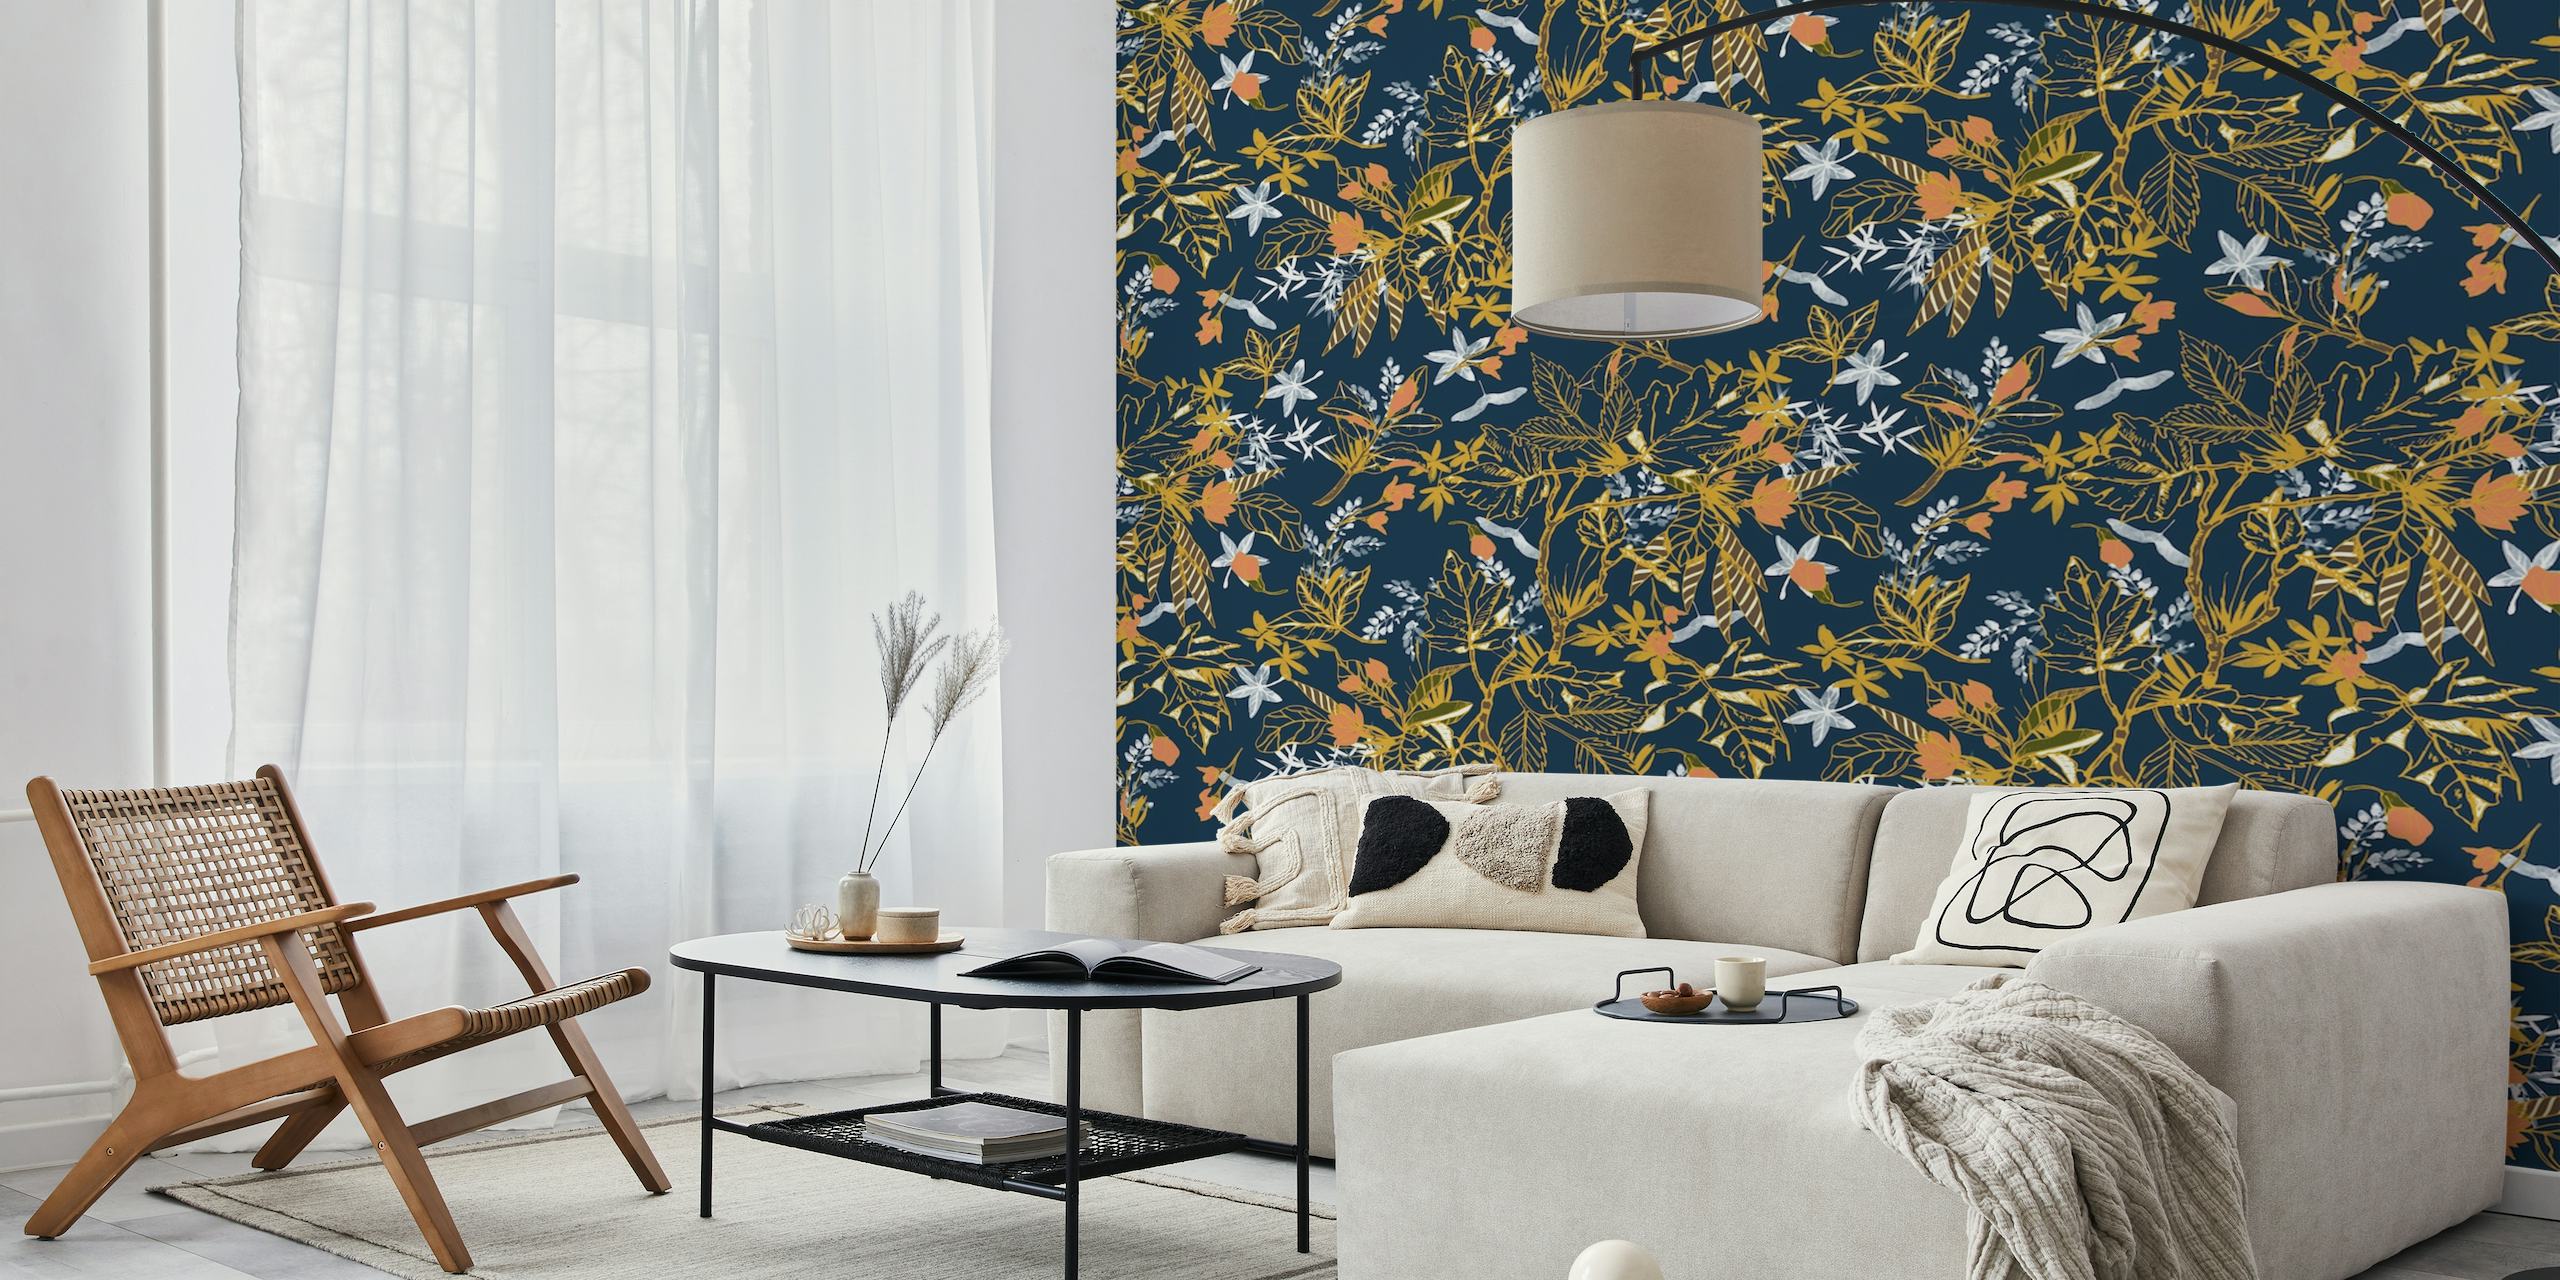 Autumnal pattern with golden and russet leaves on navy background wall mural